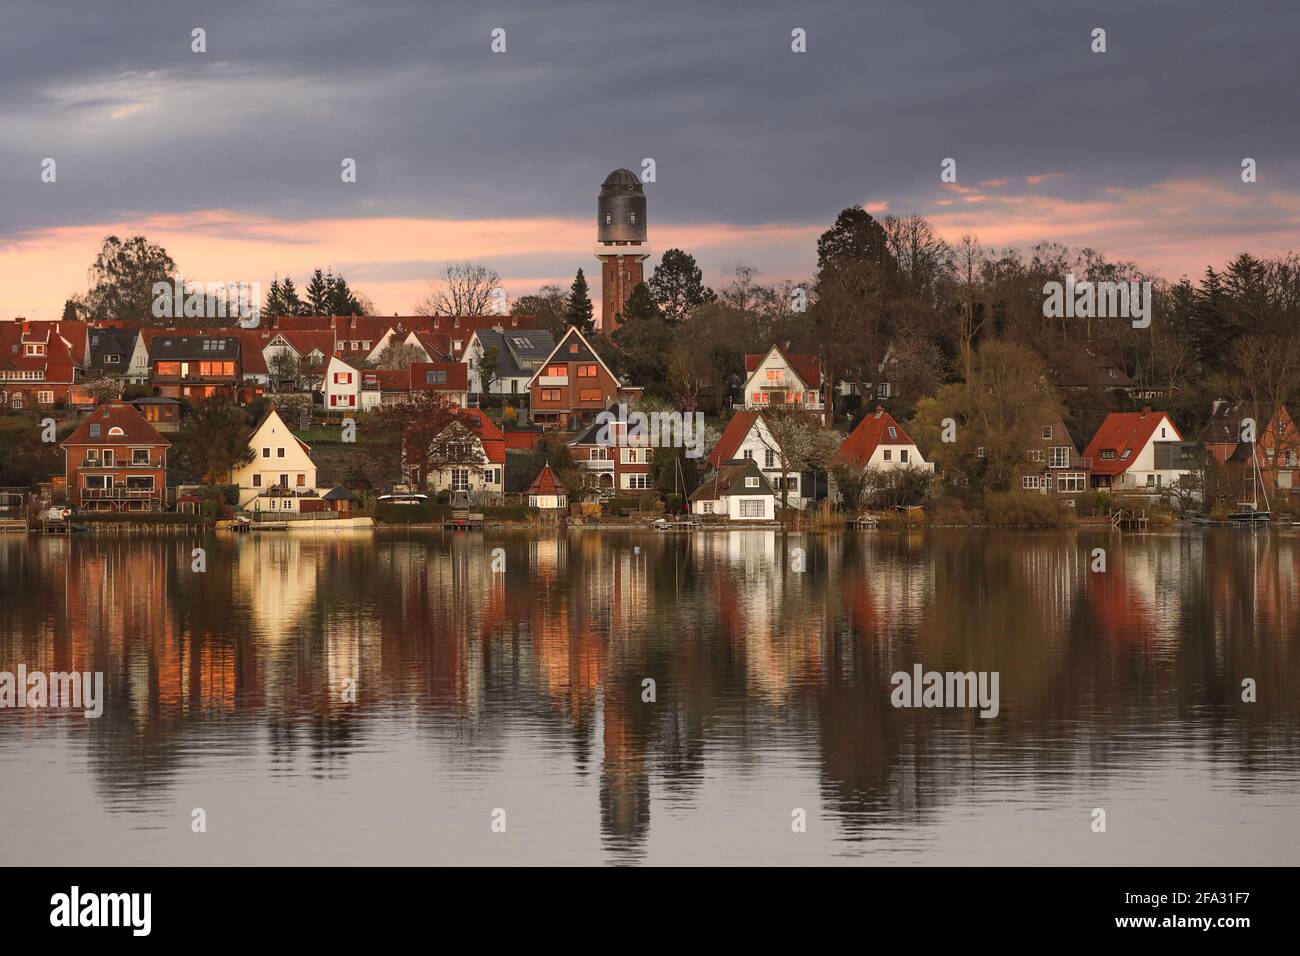 County town Plön, Northern Germany, from her romantic side with beautiful, warm colors. Stock Photo